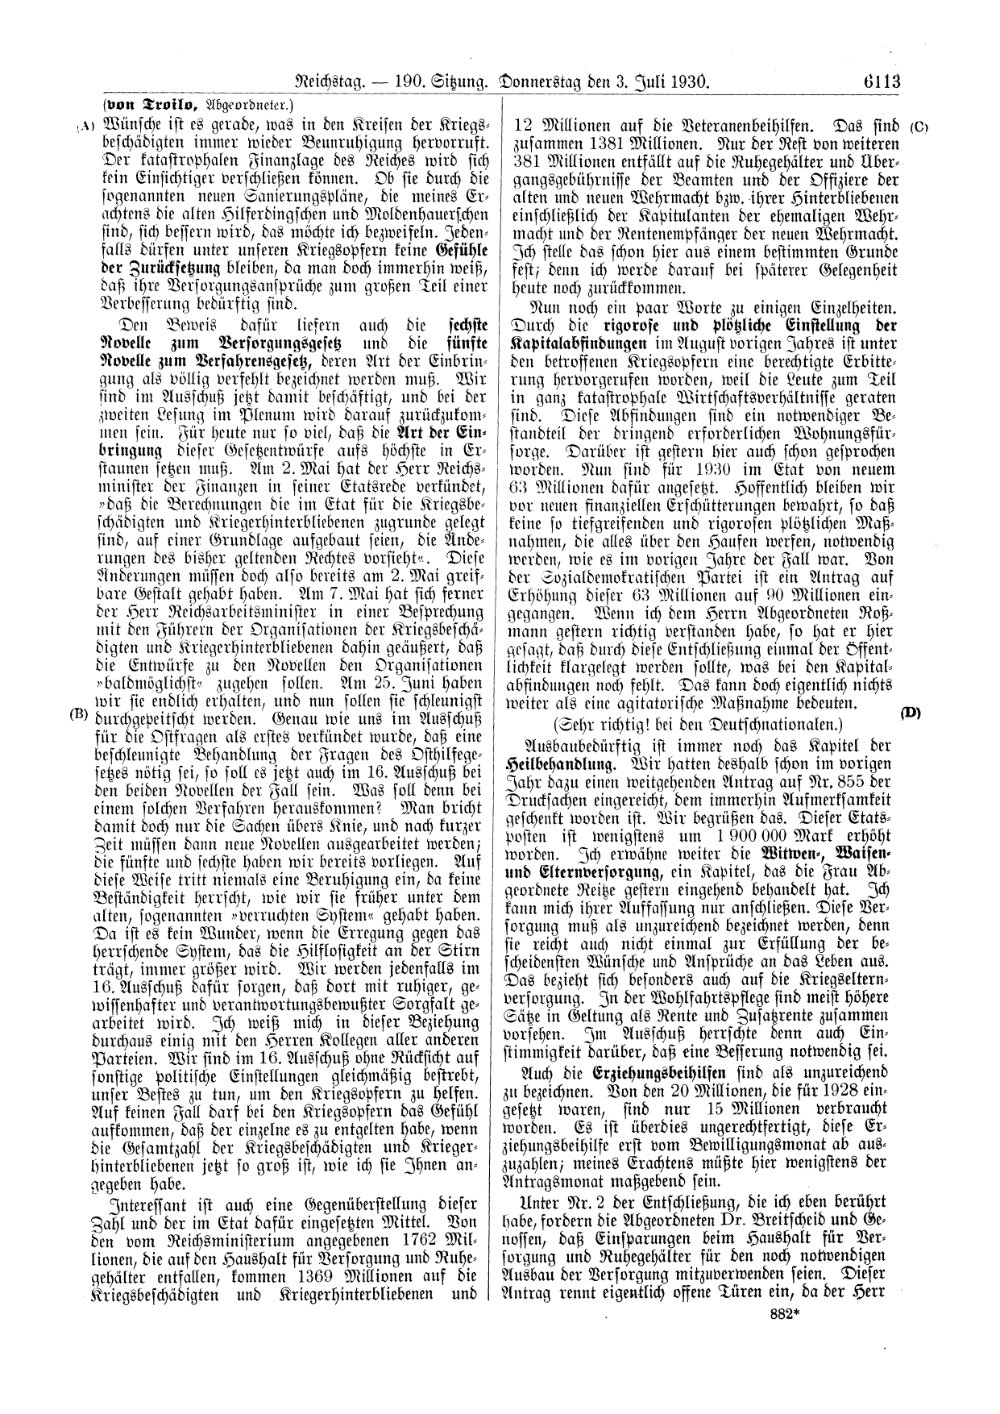 Scan of page 6113